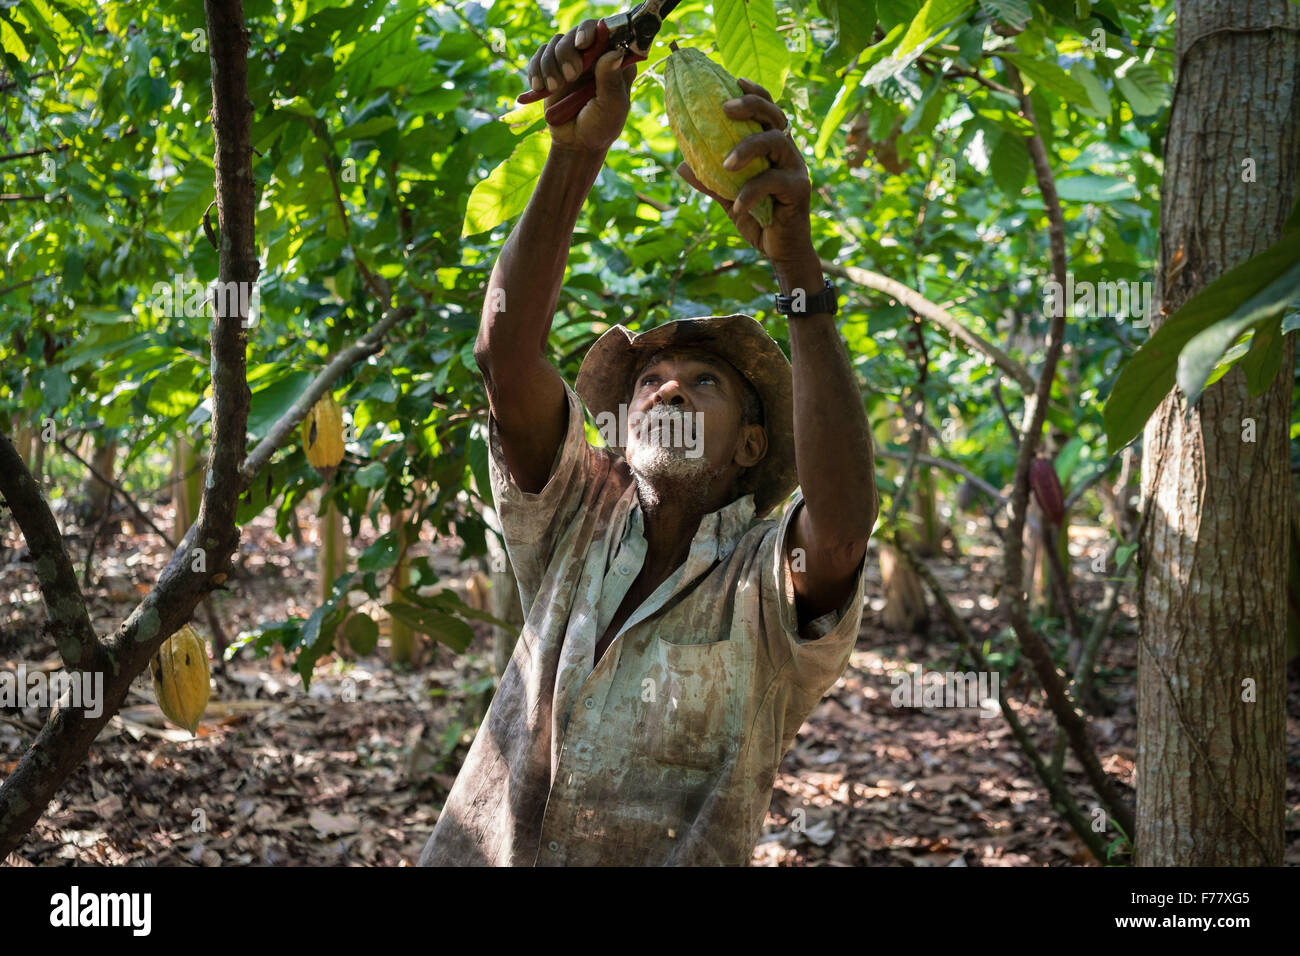 A farmer cuts ripe cocoa pods off a tree during harvest on his small farm February 23, 2015 in Isla de la Amargura, Careers, Colombia. Cocoa pods are dried and fermented becoming the basis of chocolate. Stock Photo